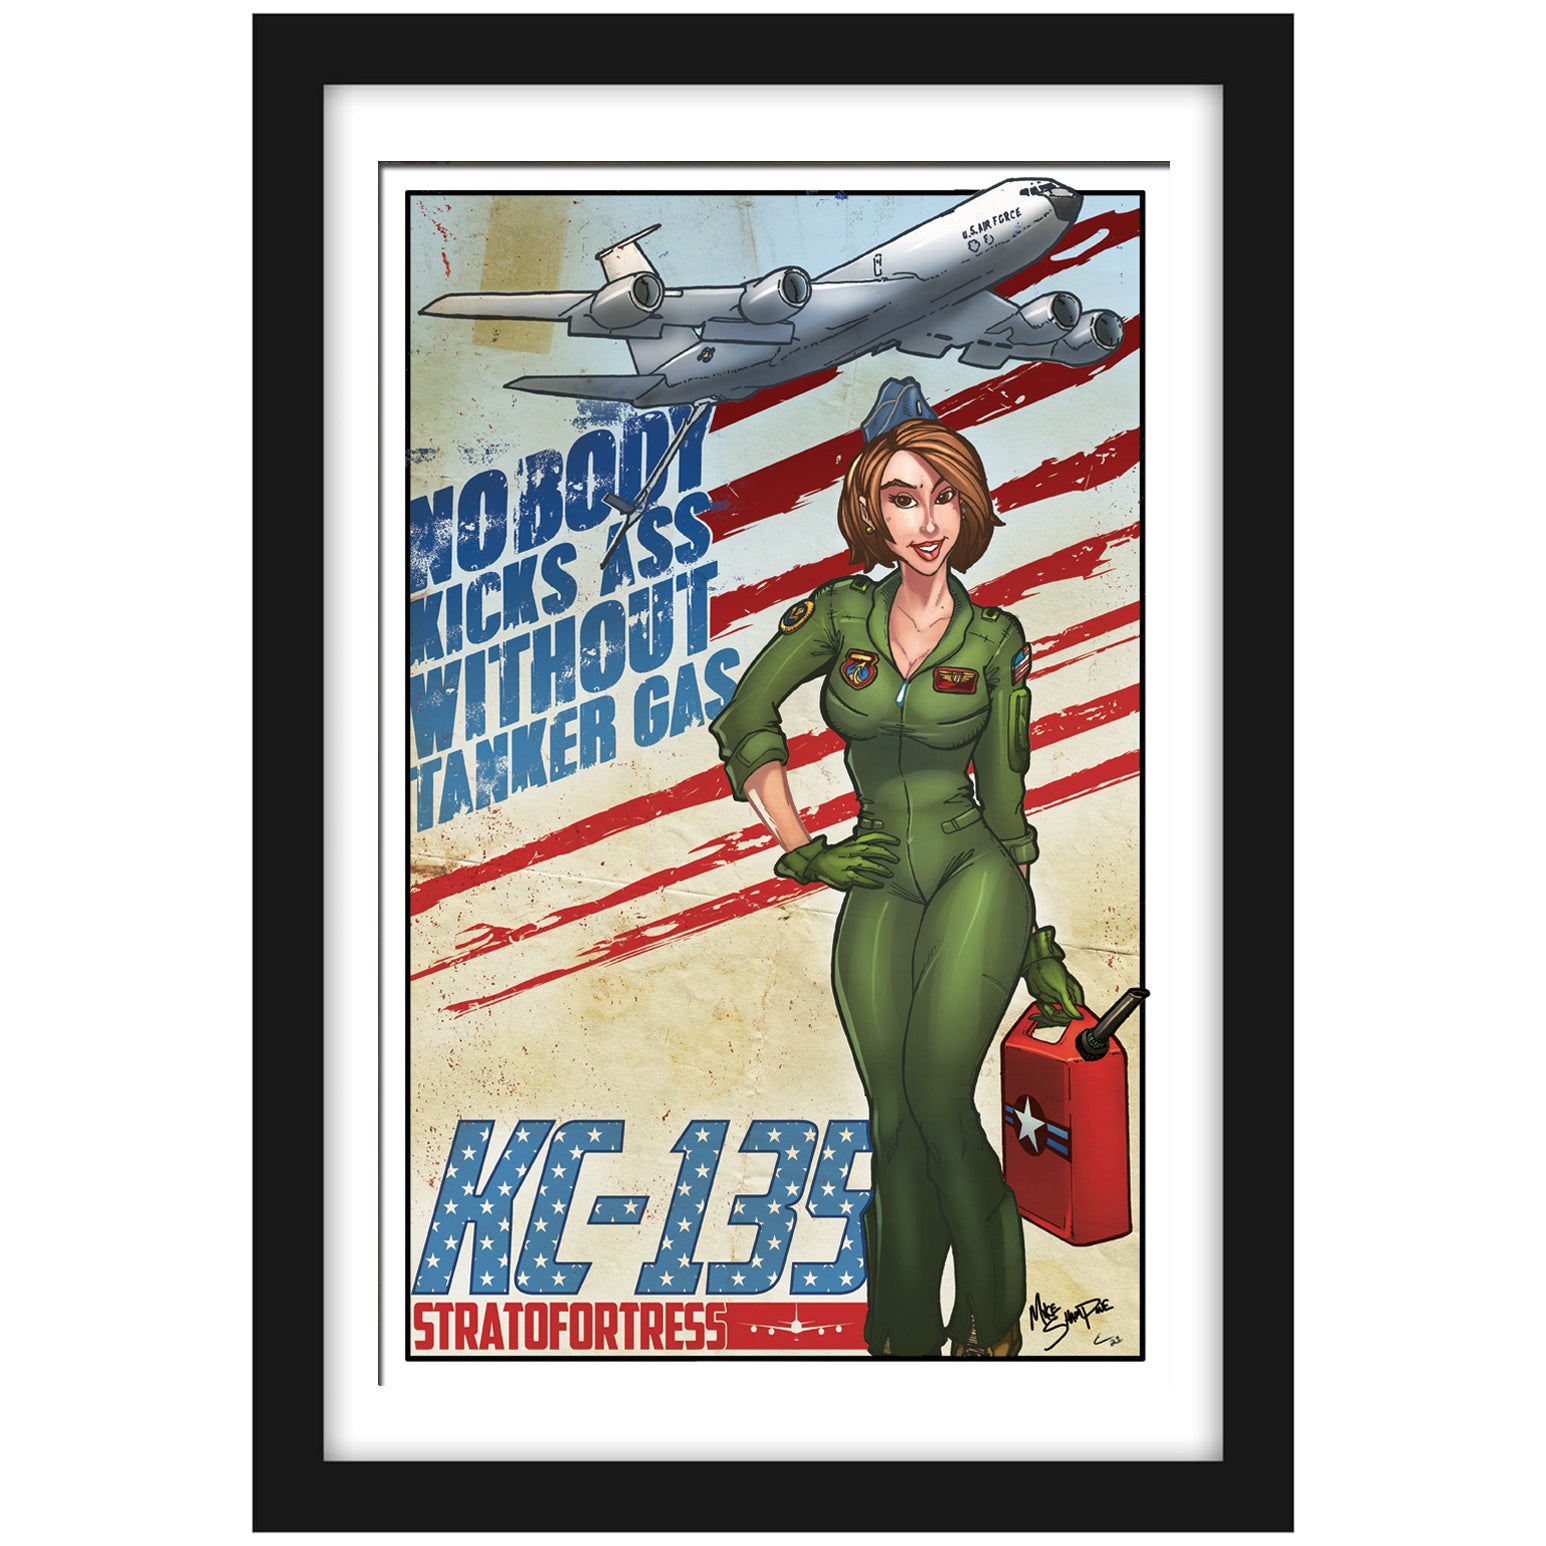 KC-135 "Tanker Gas" - Vintage Print Pinup & Airplane Art by Mike Shampine - Signed and Numbered